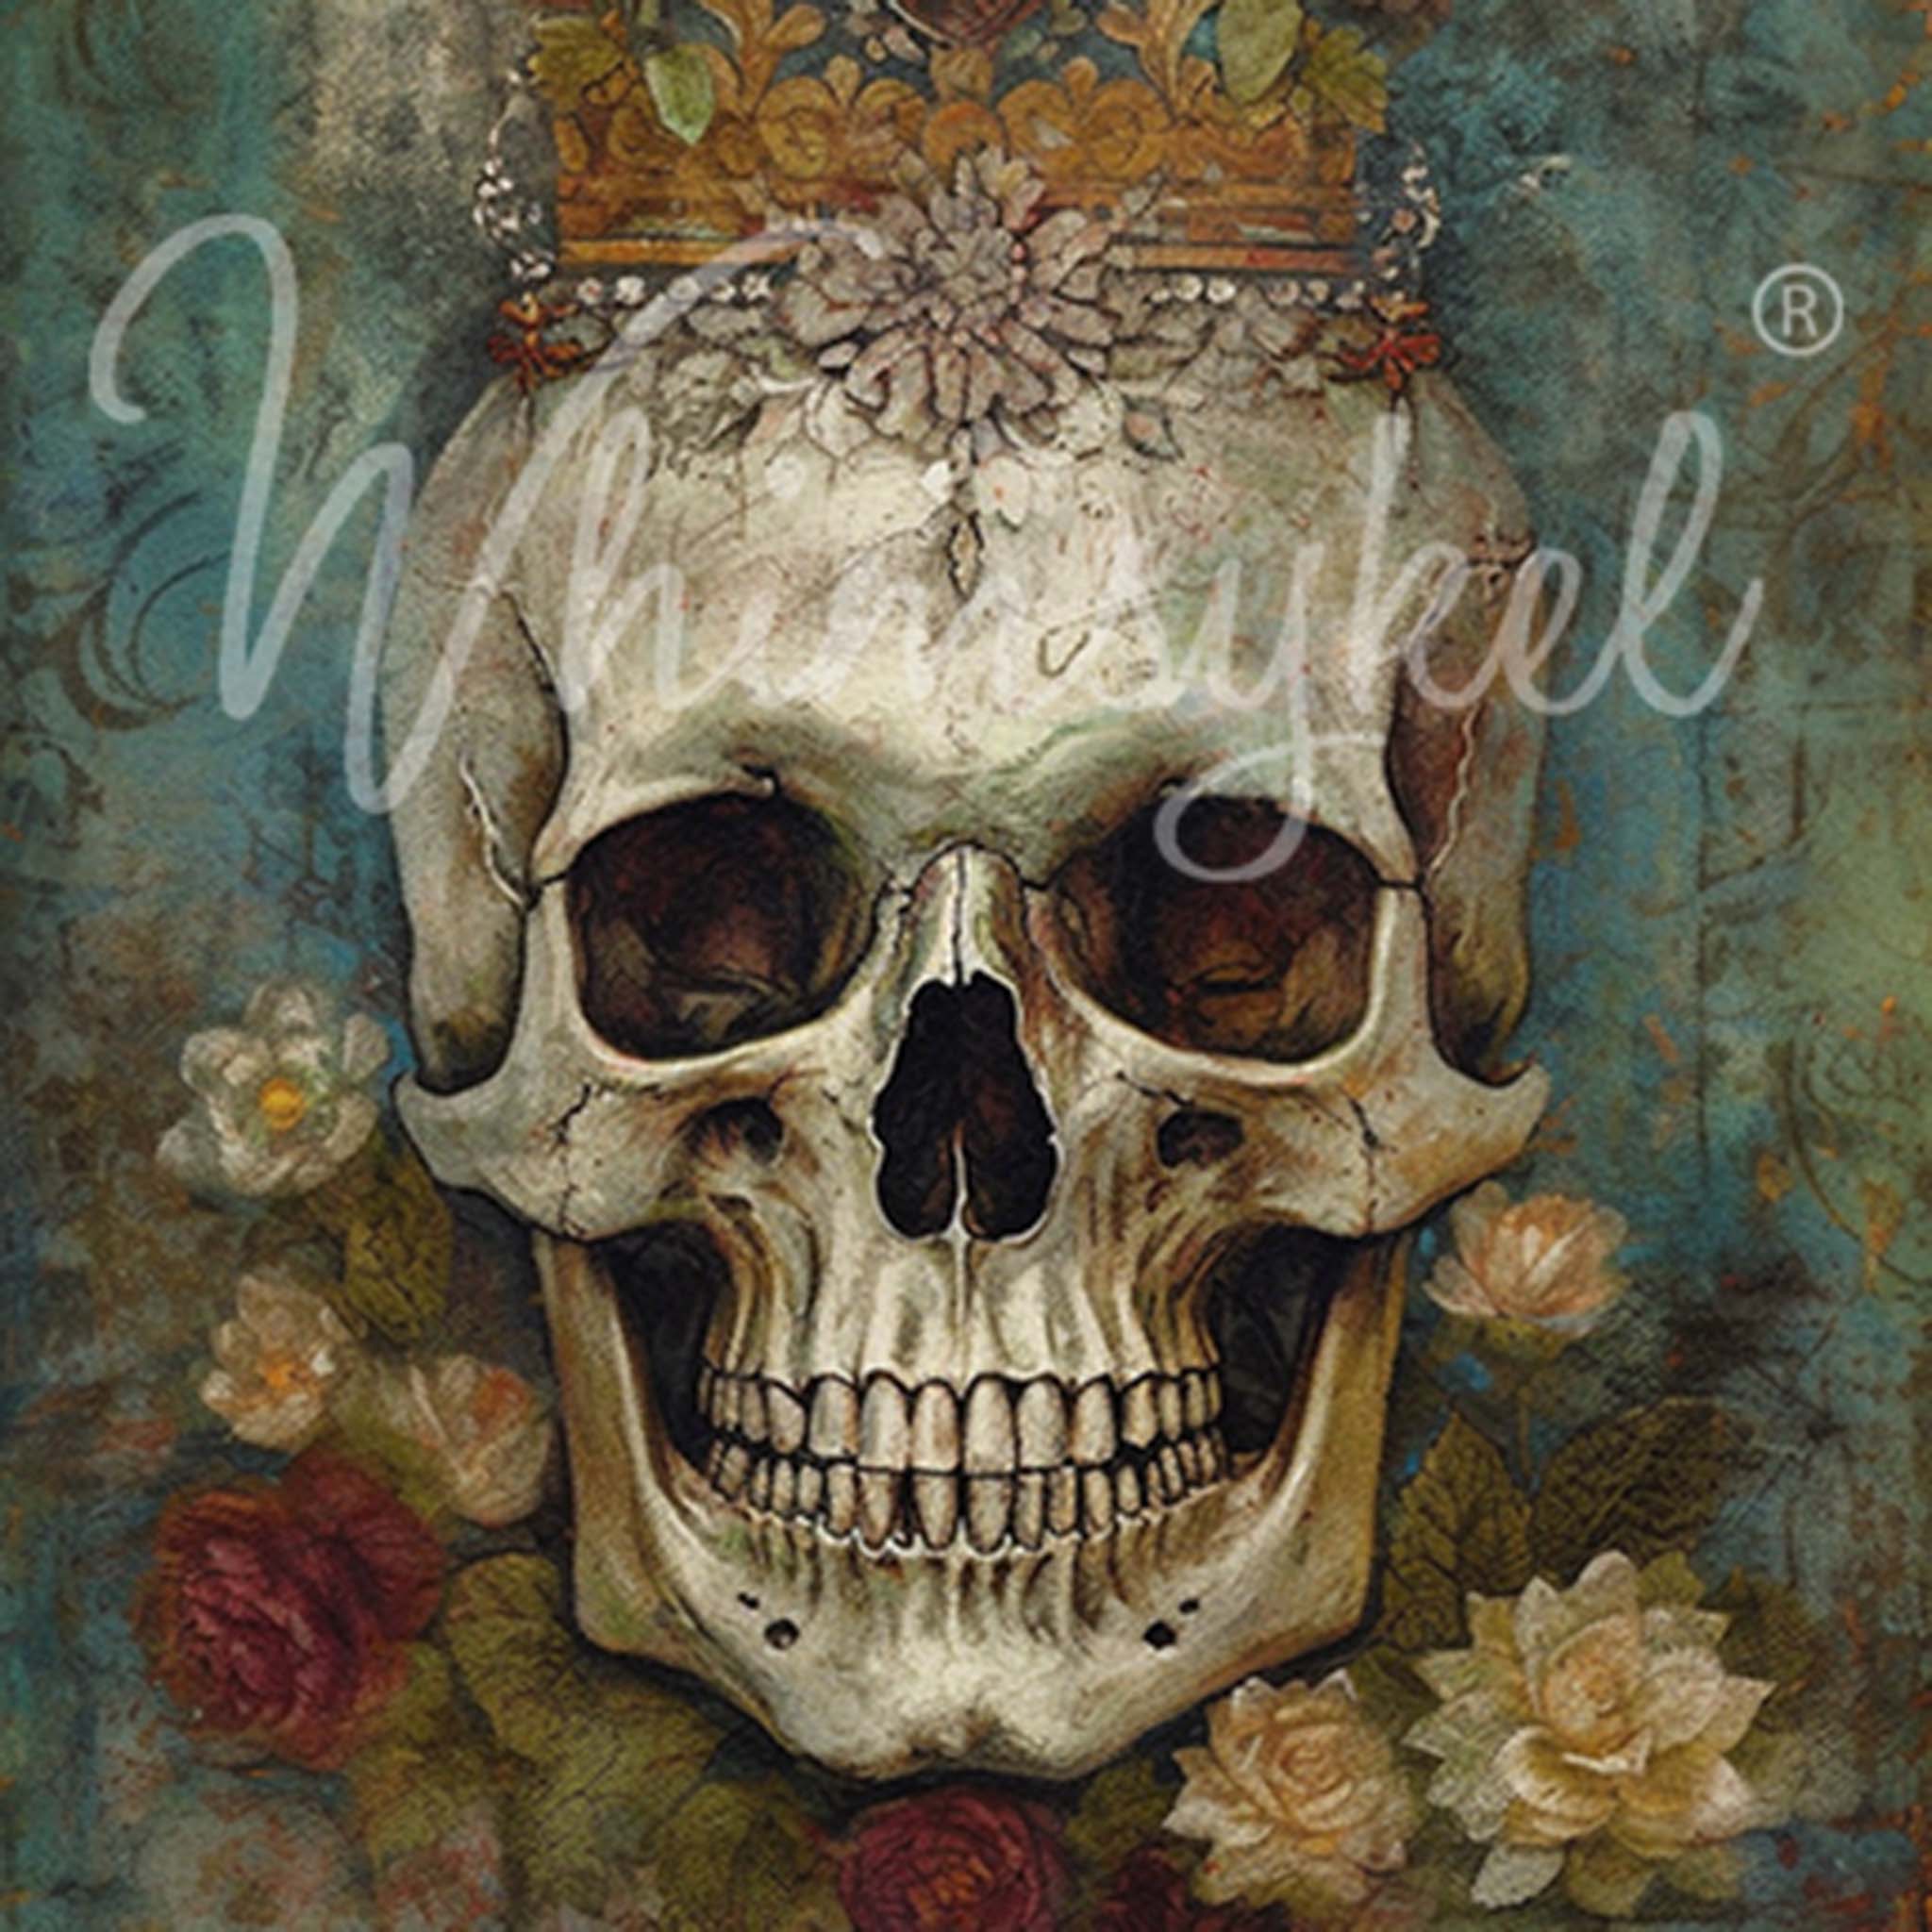 Close-up of Whimsykel's Skull Queen tissue paper that features dark and magical design of a skull with a crown and flowers.